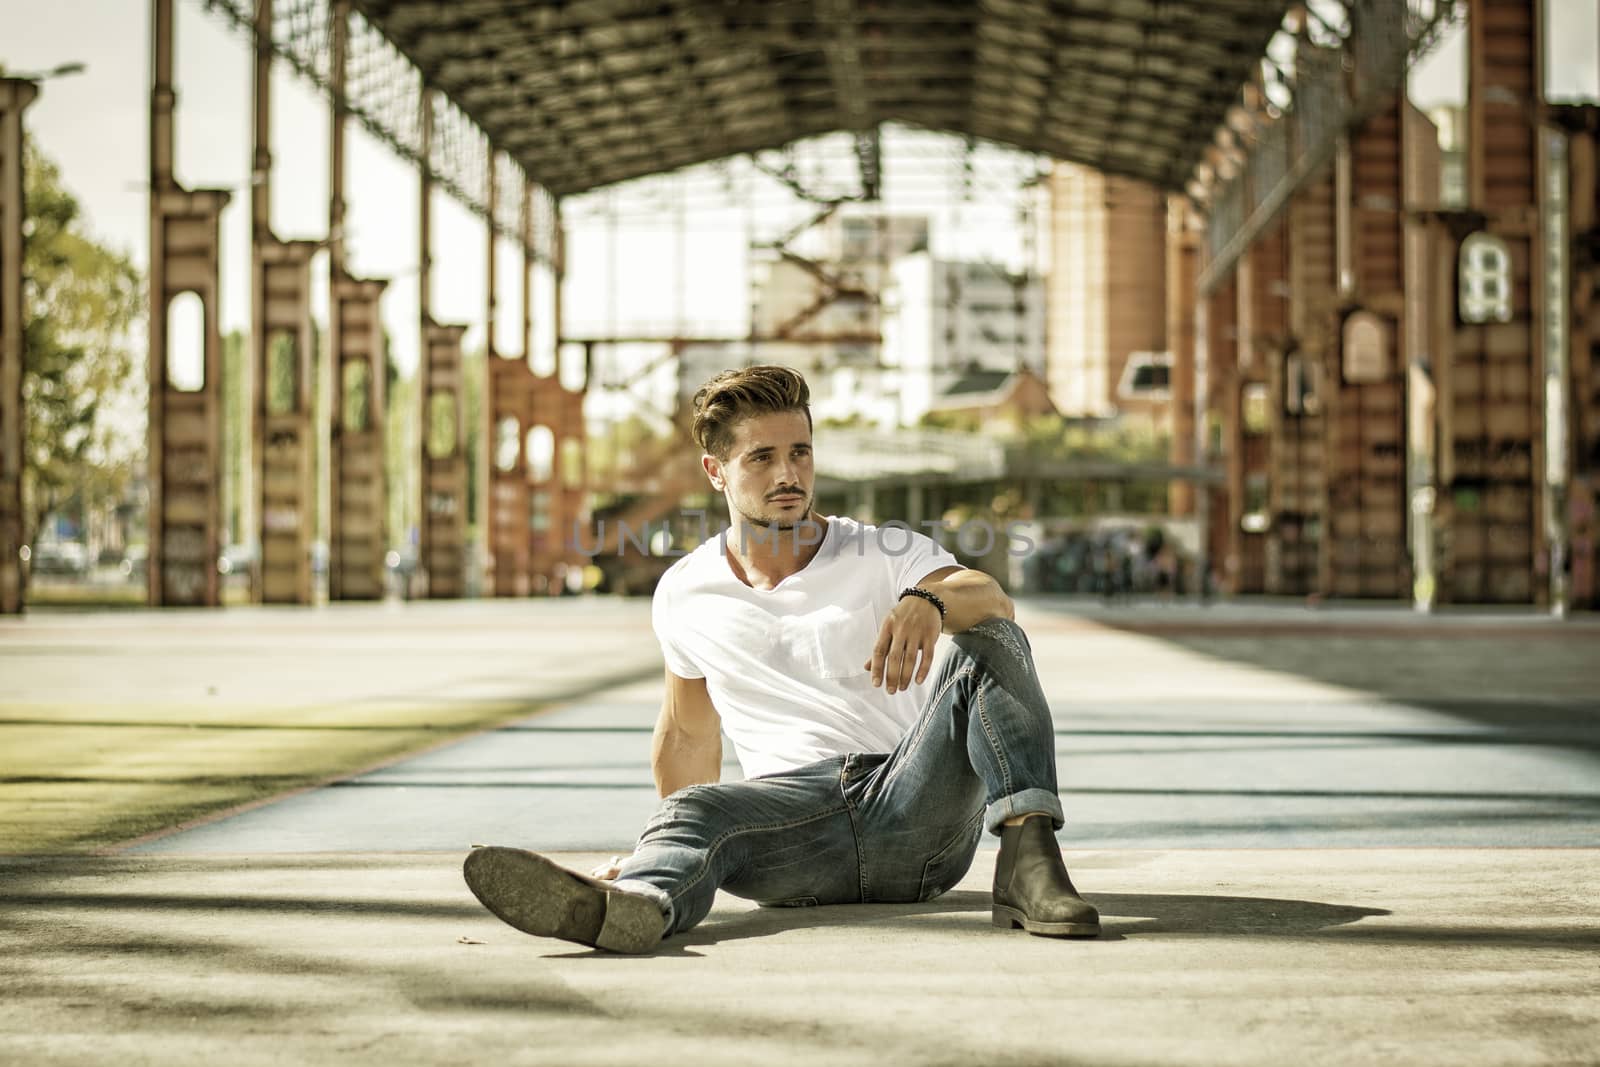 Attractive man in urban setting under big metal structure, a former industrial site